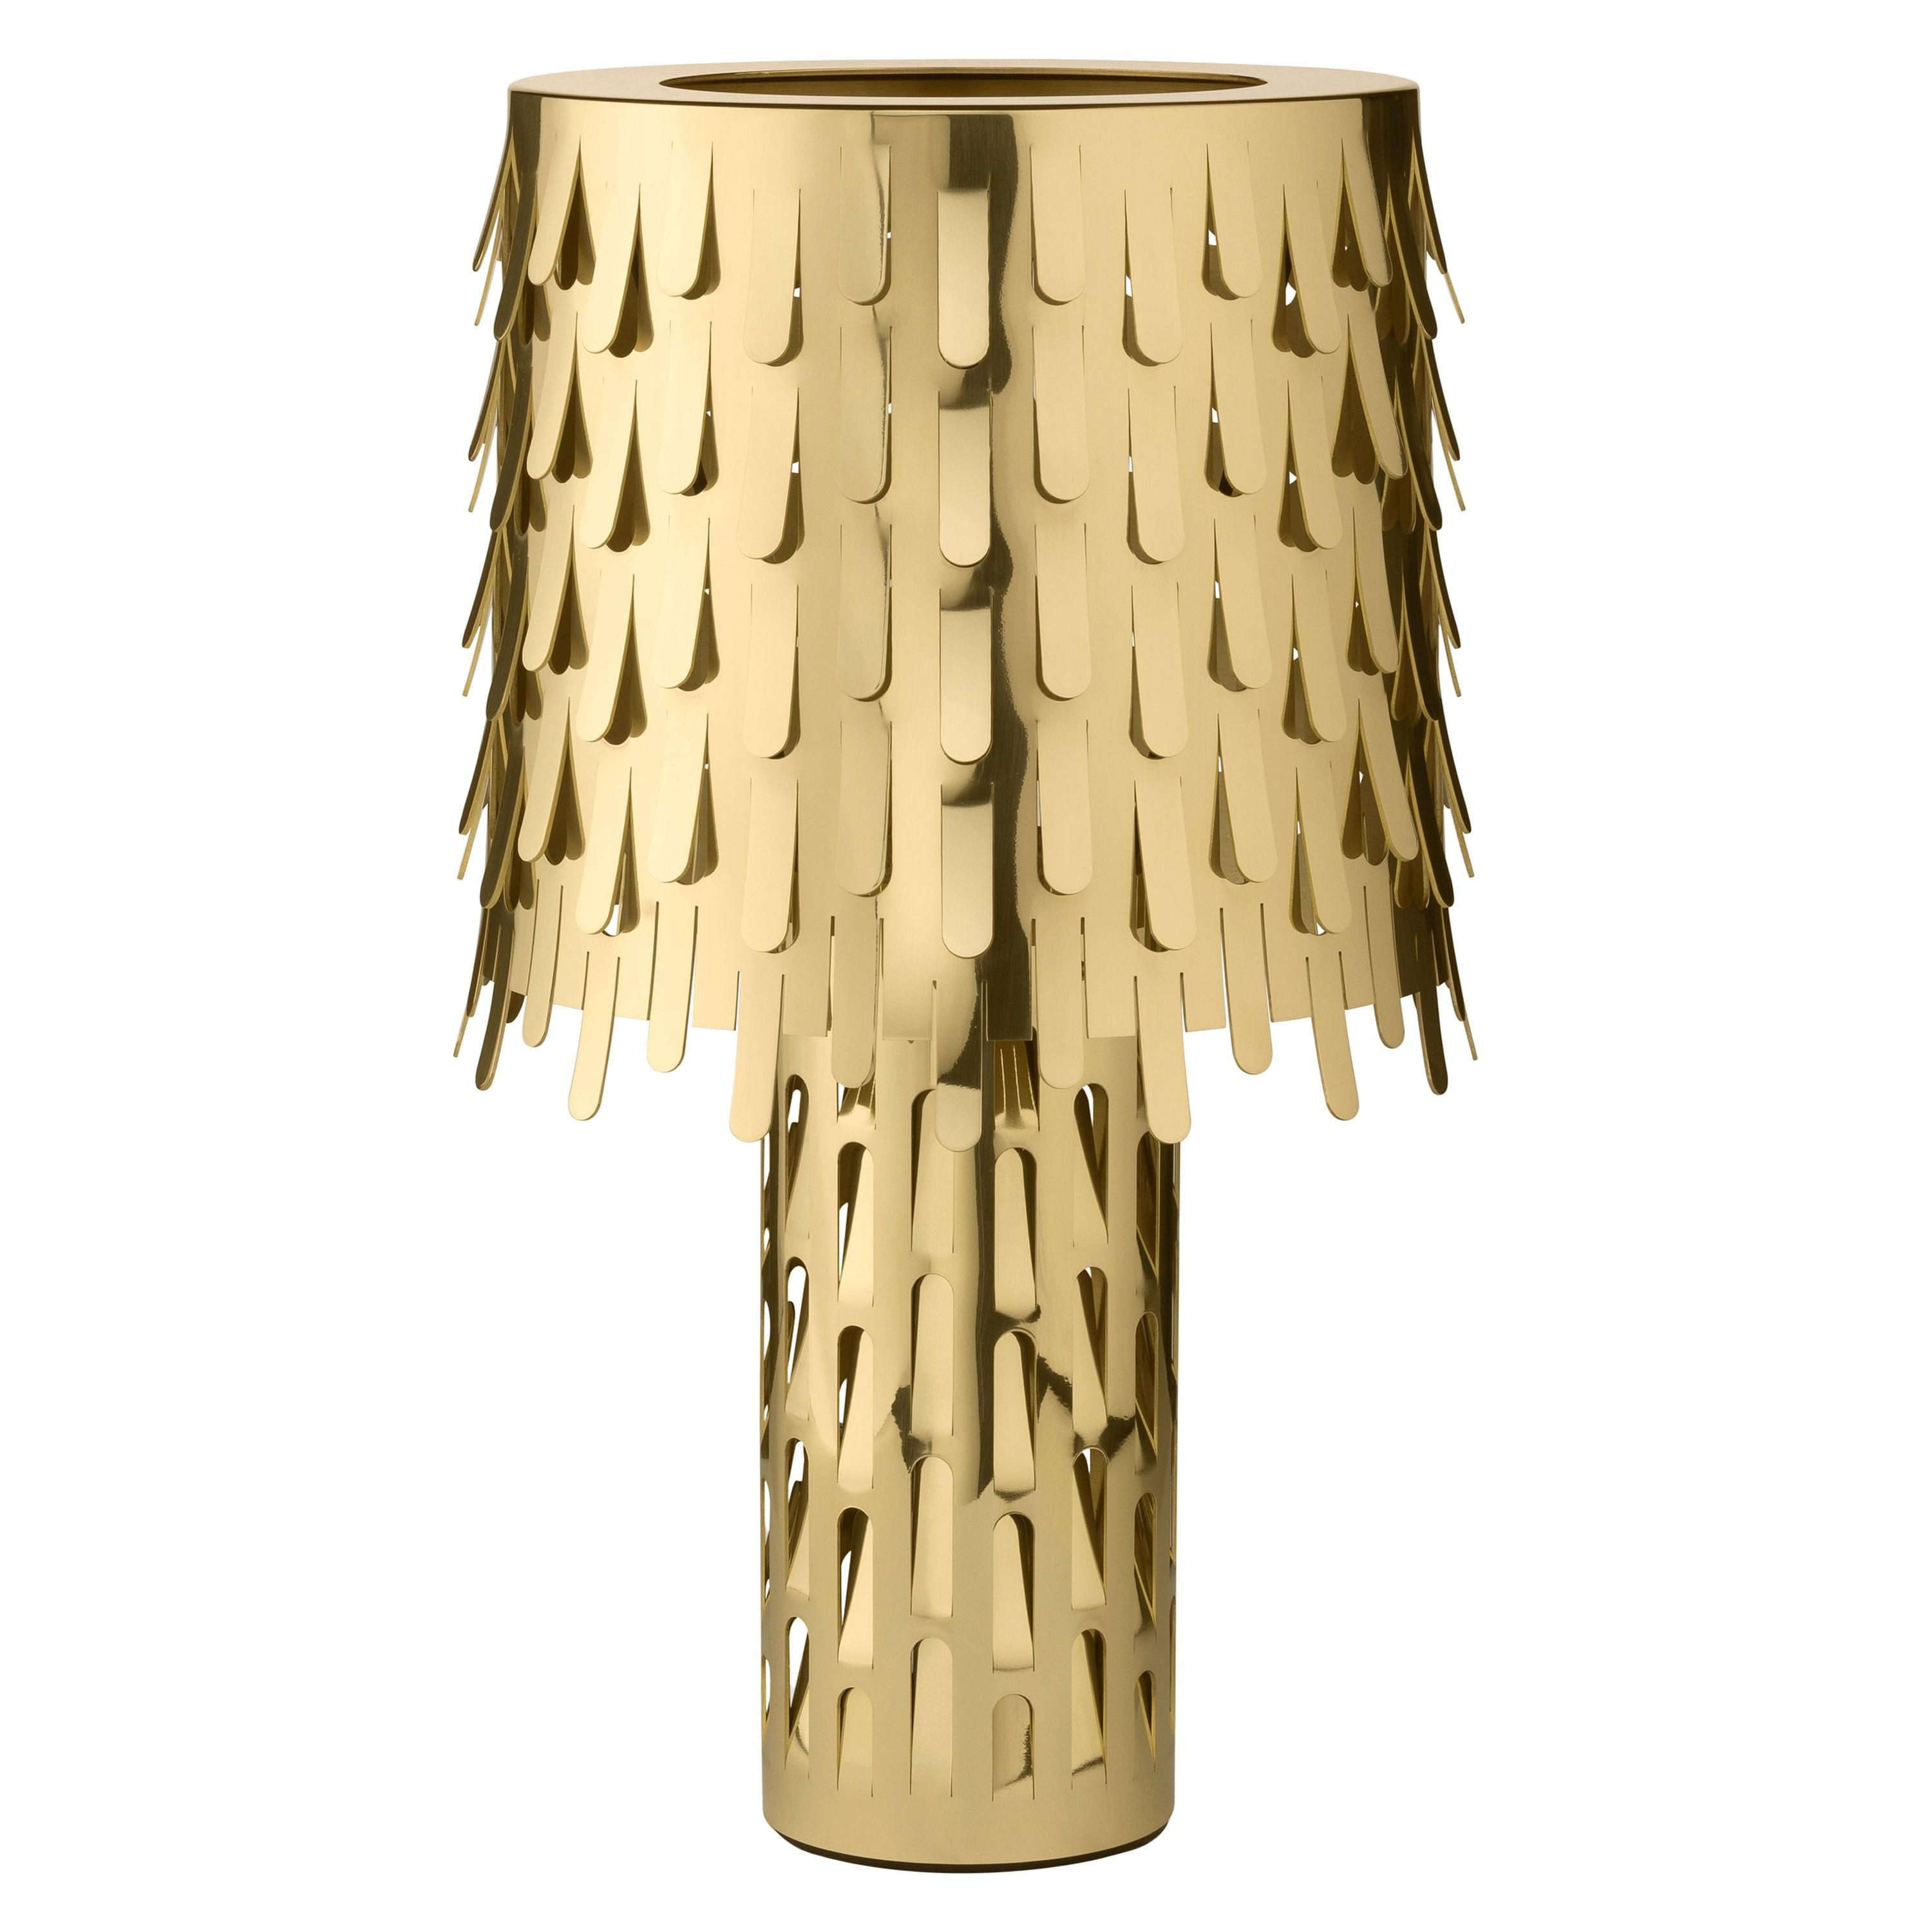 Jackfruit Table Lamp in Polished Brass by Campana Brothers